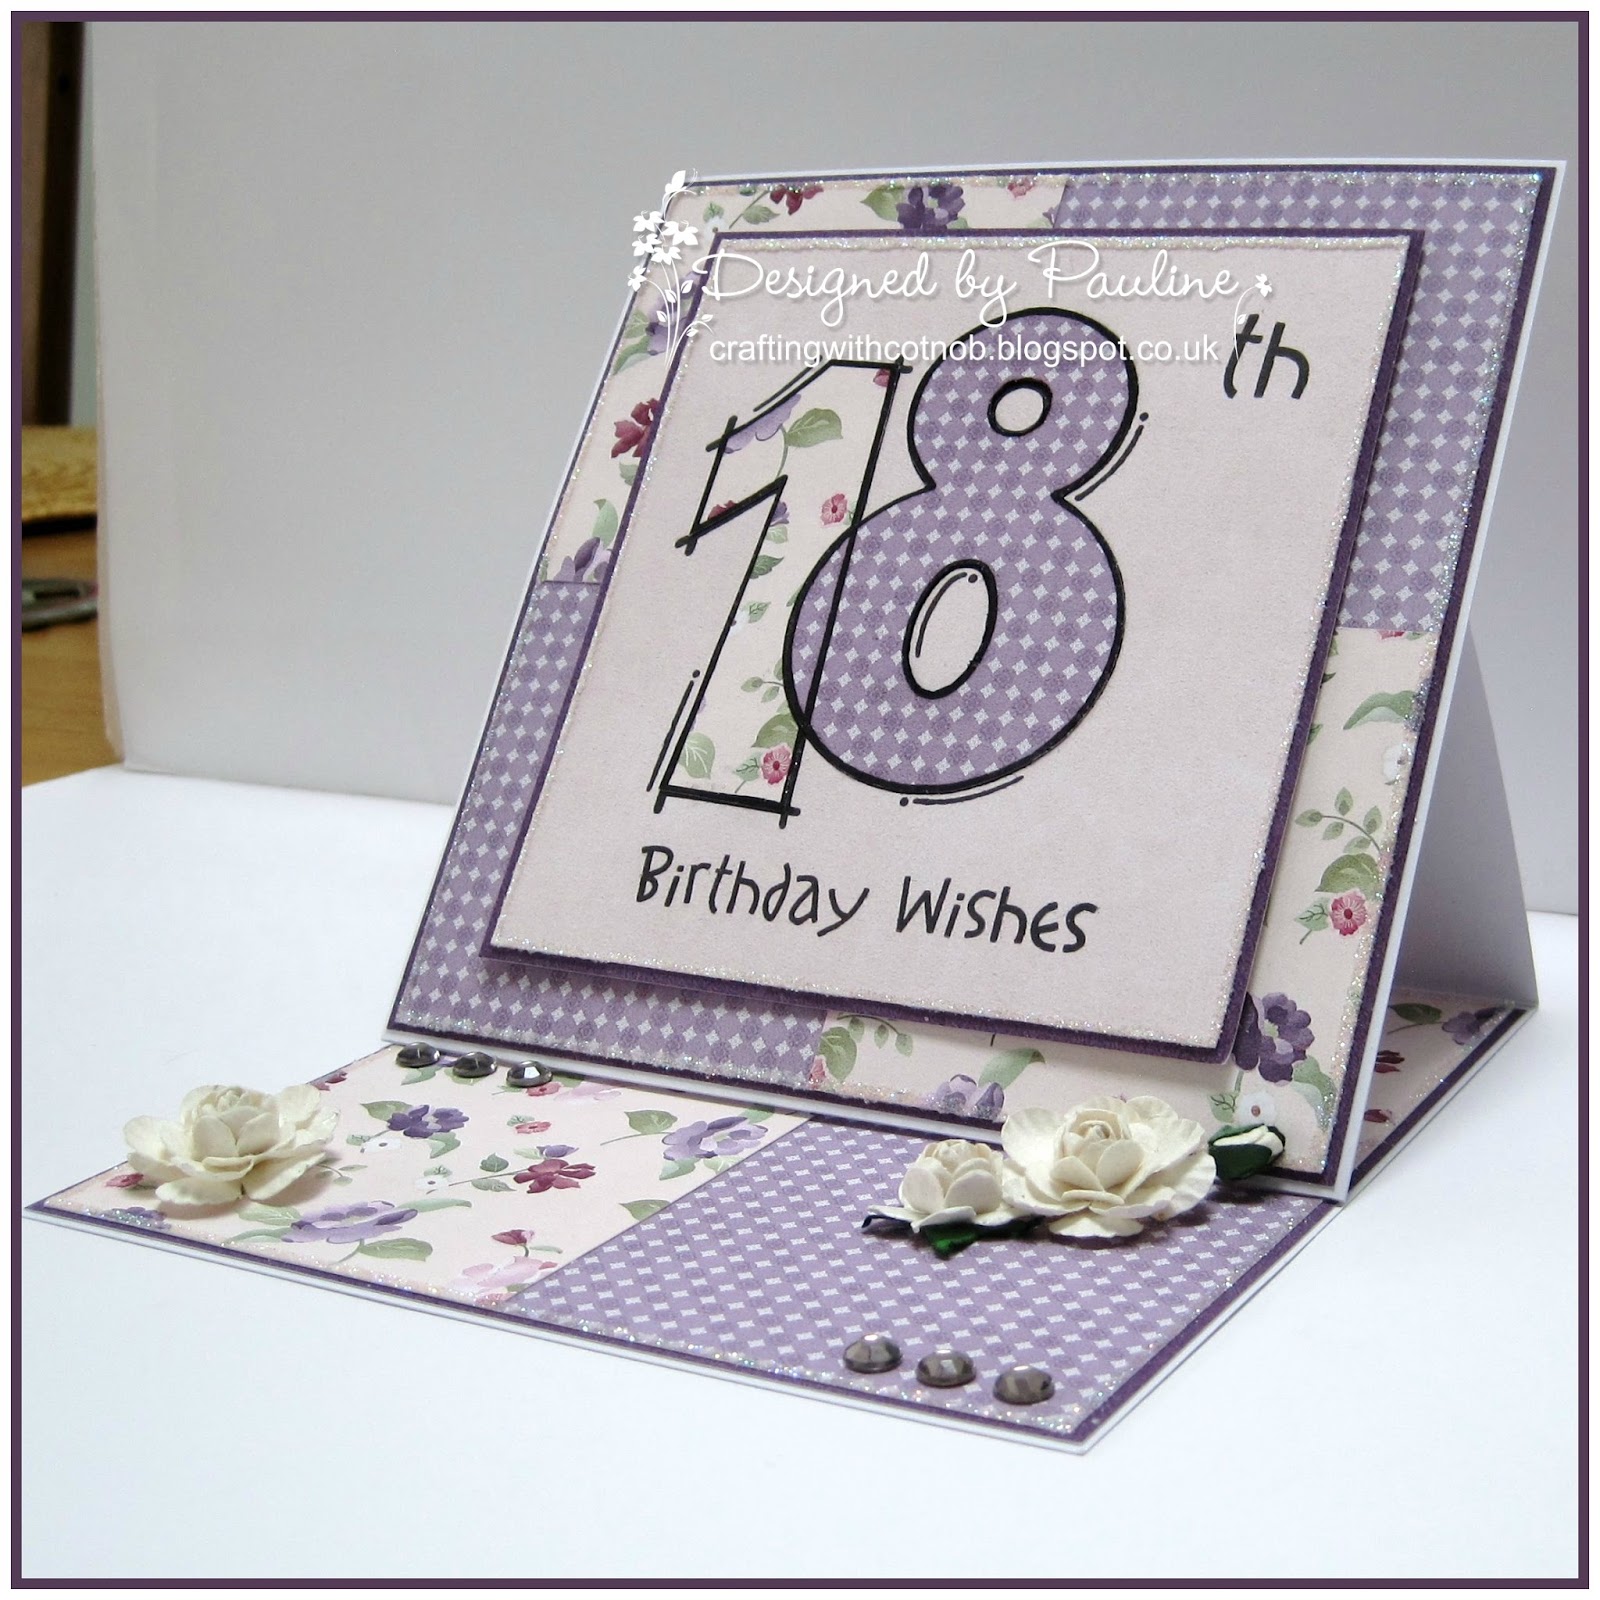 Crafting with Cotnob: 18th Birthday Wishes